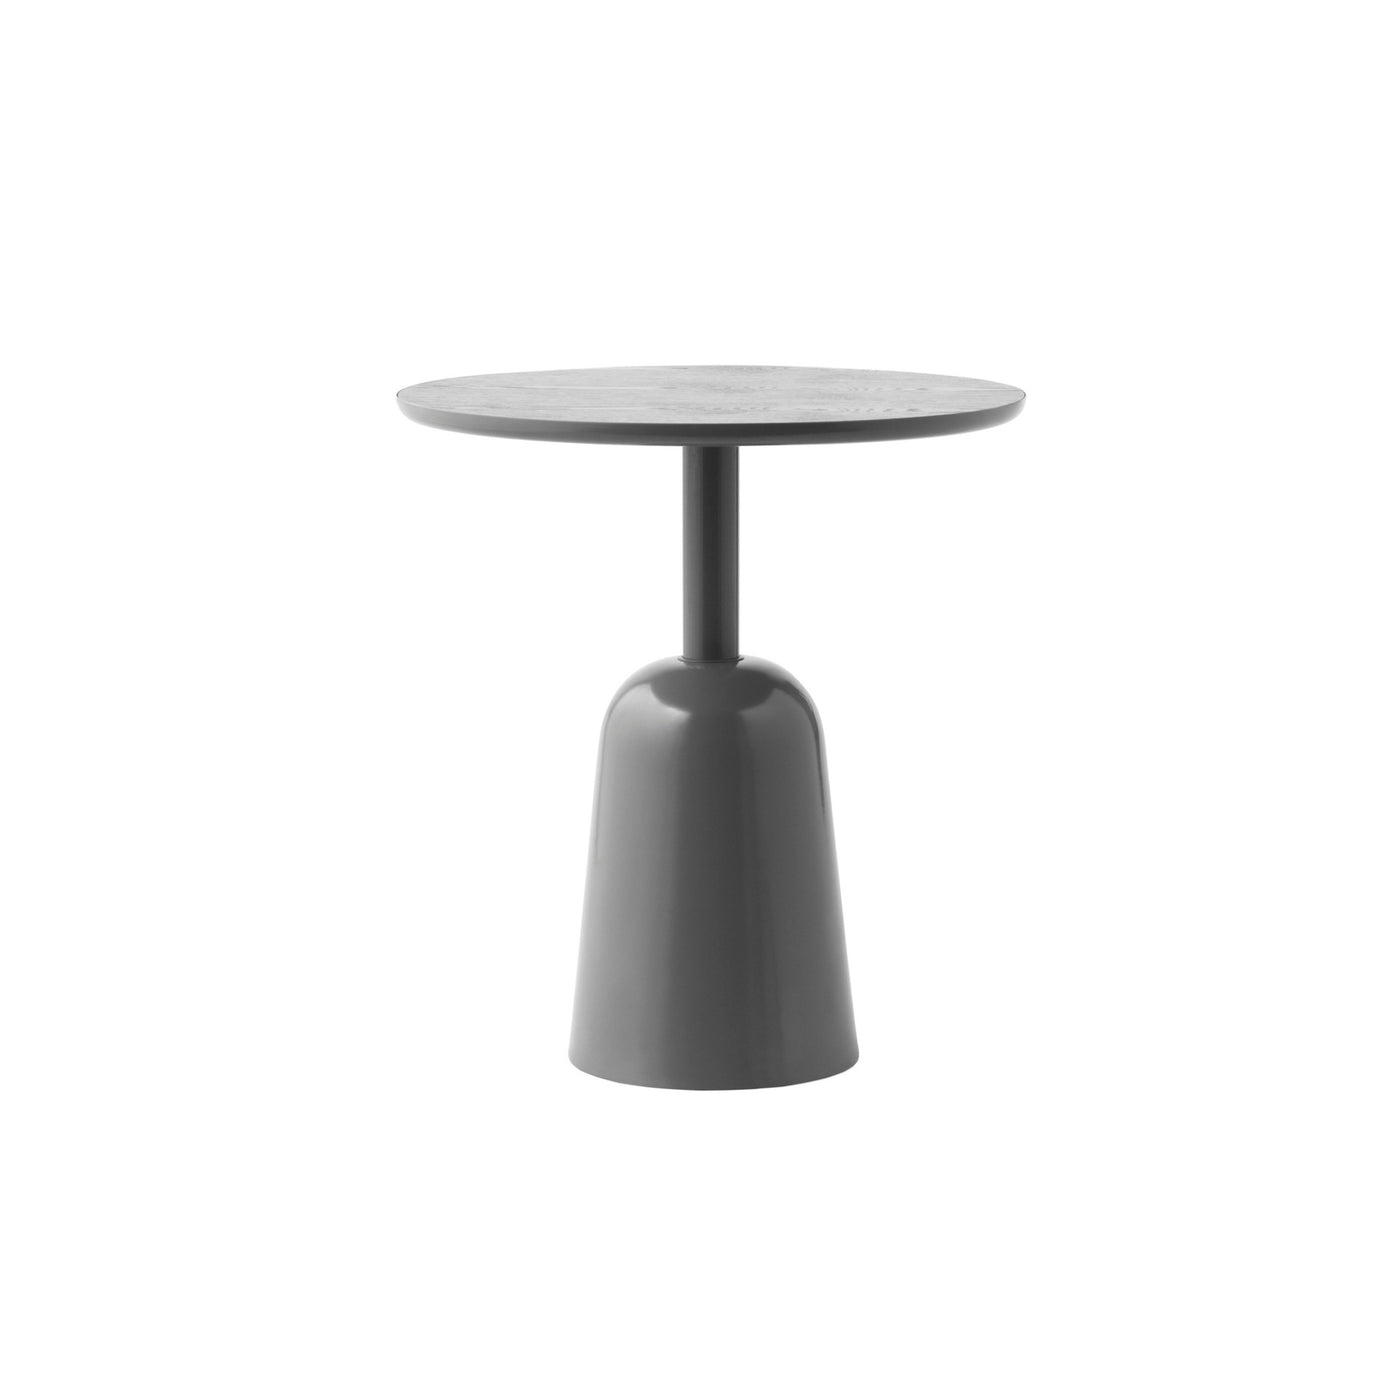 Normann Copenhagen Turn Table at someday designs. #colour_grey